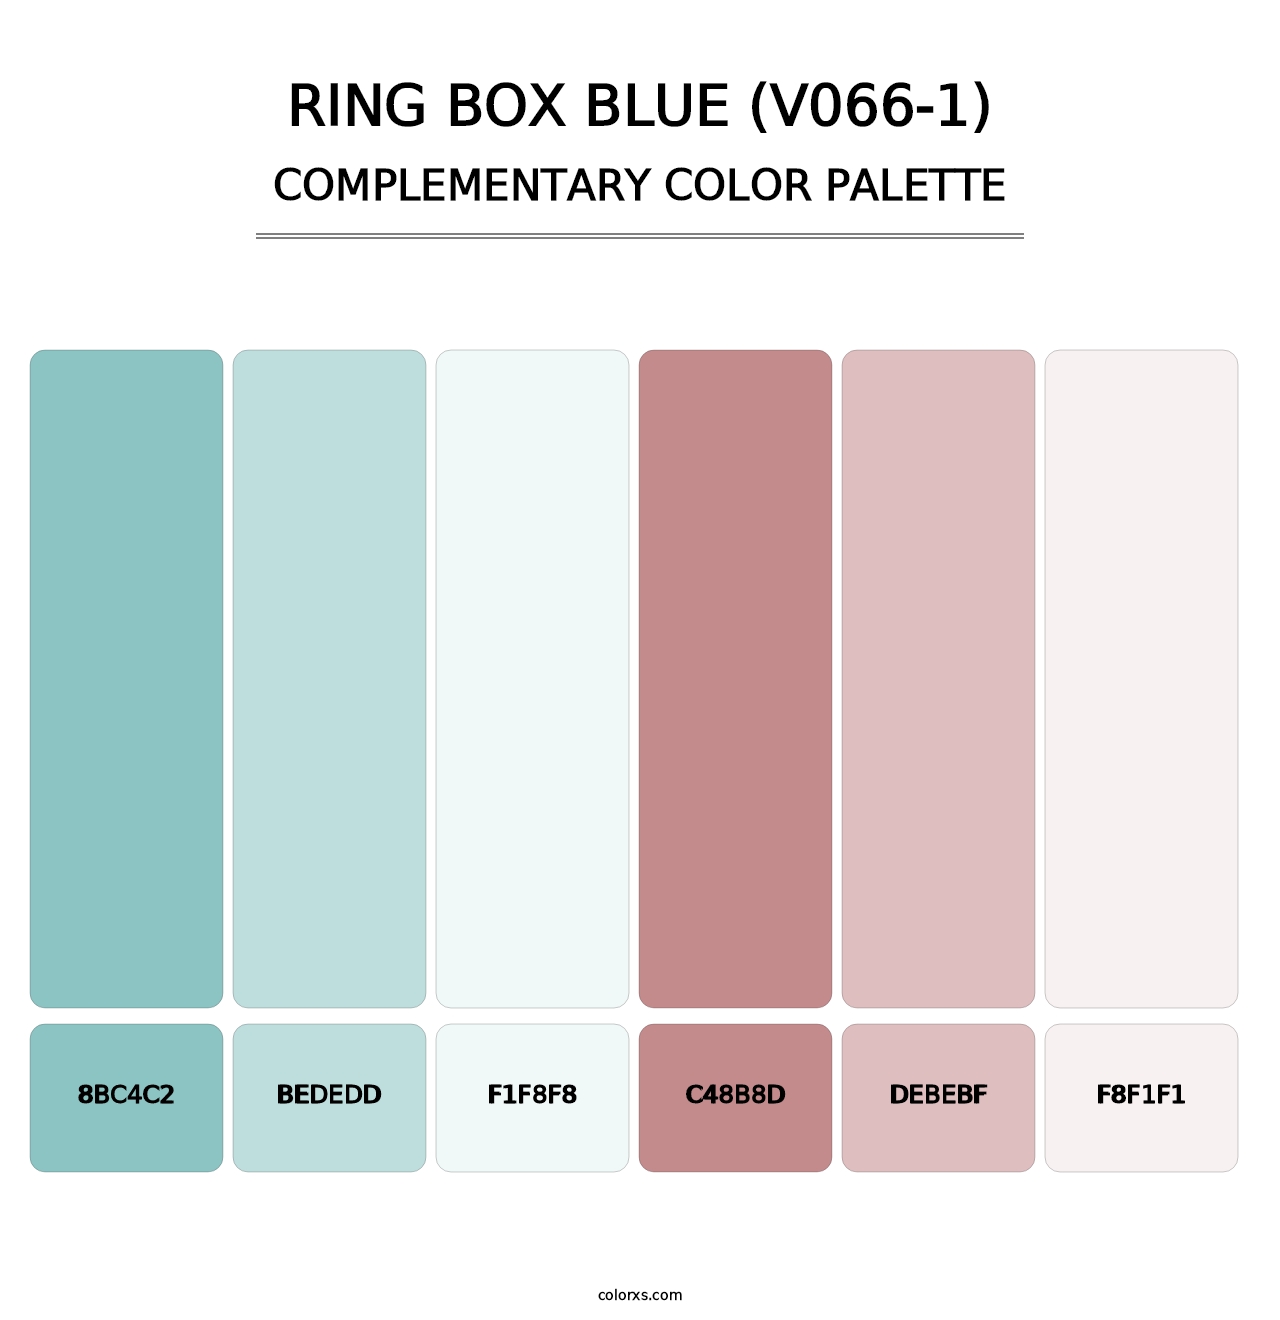 Ring Box Blue (V066-1) - Complementary Color Palette